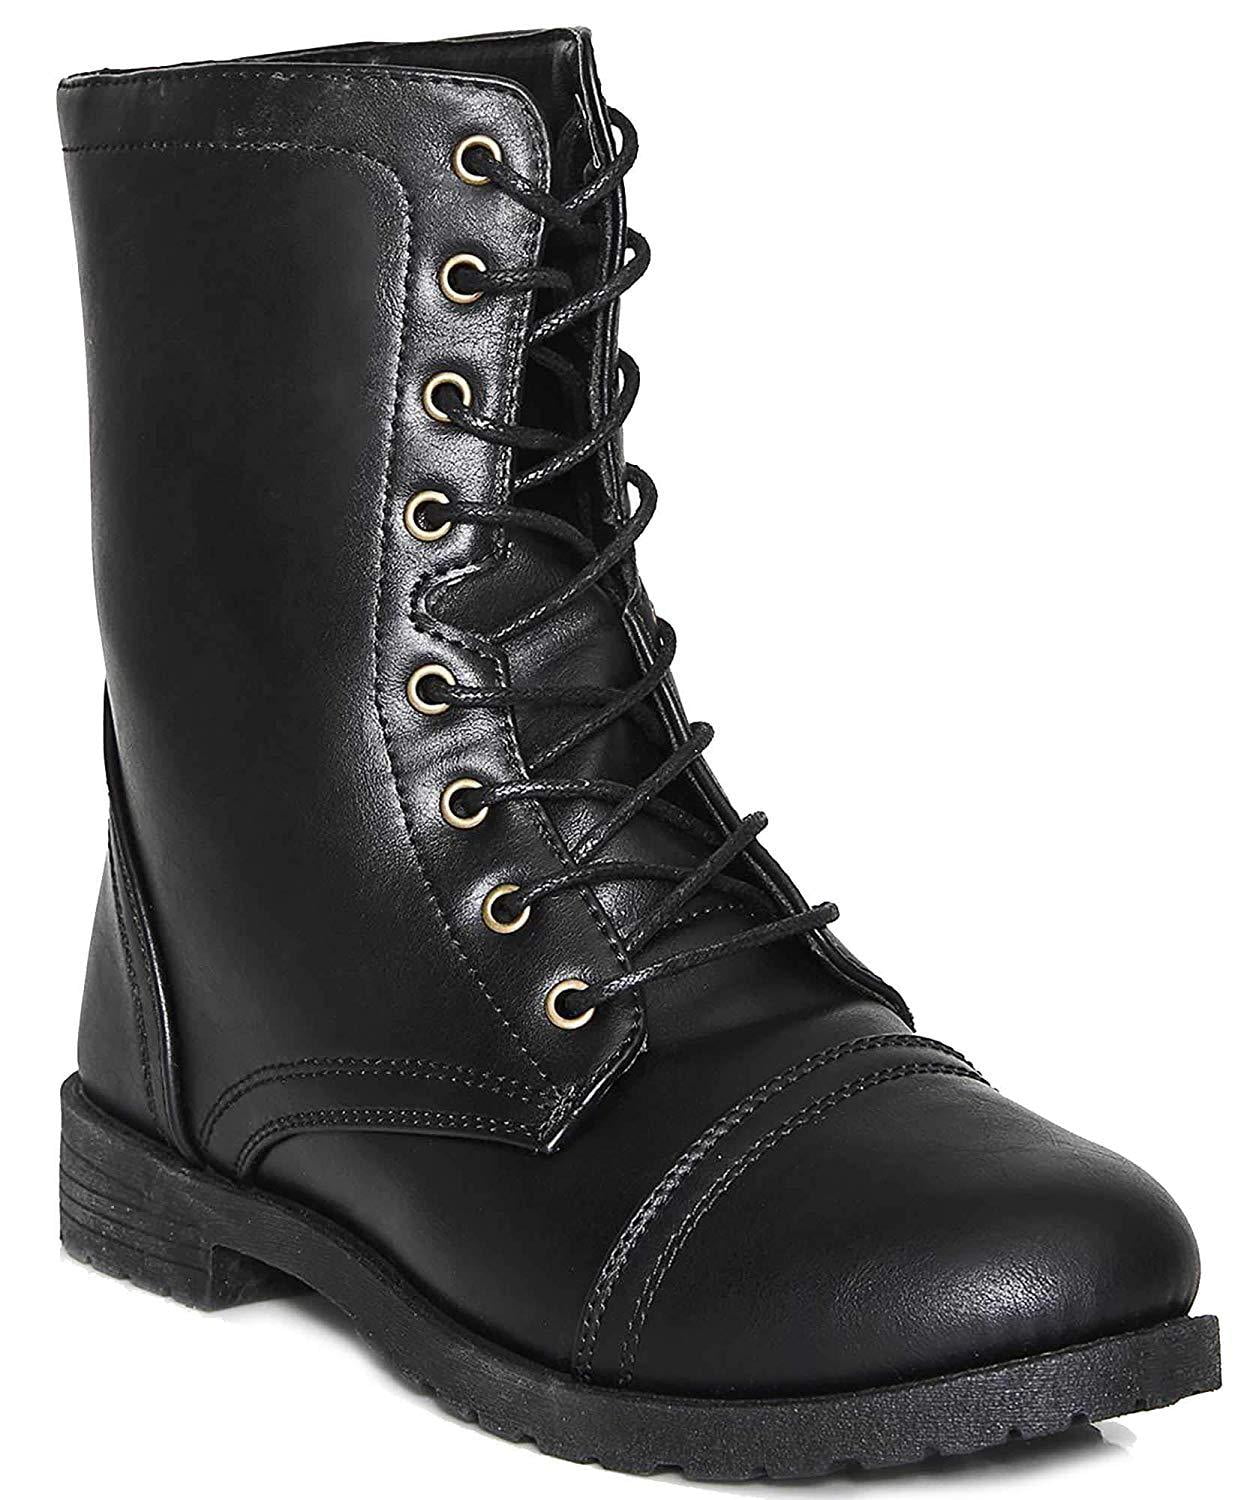 military combat boots